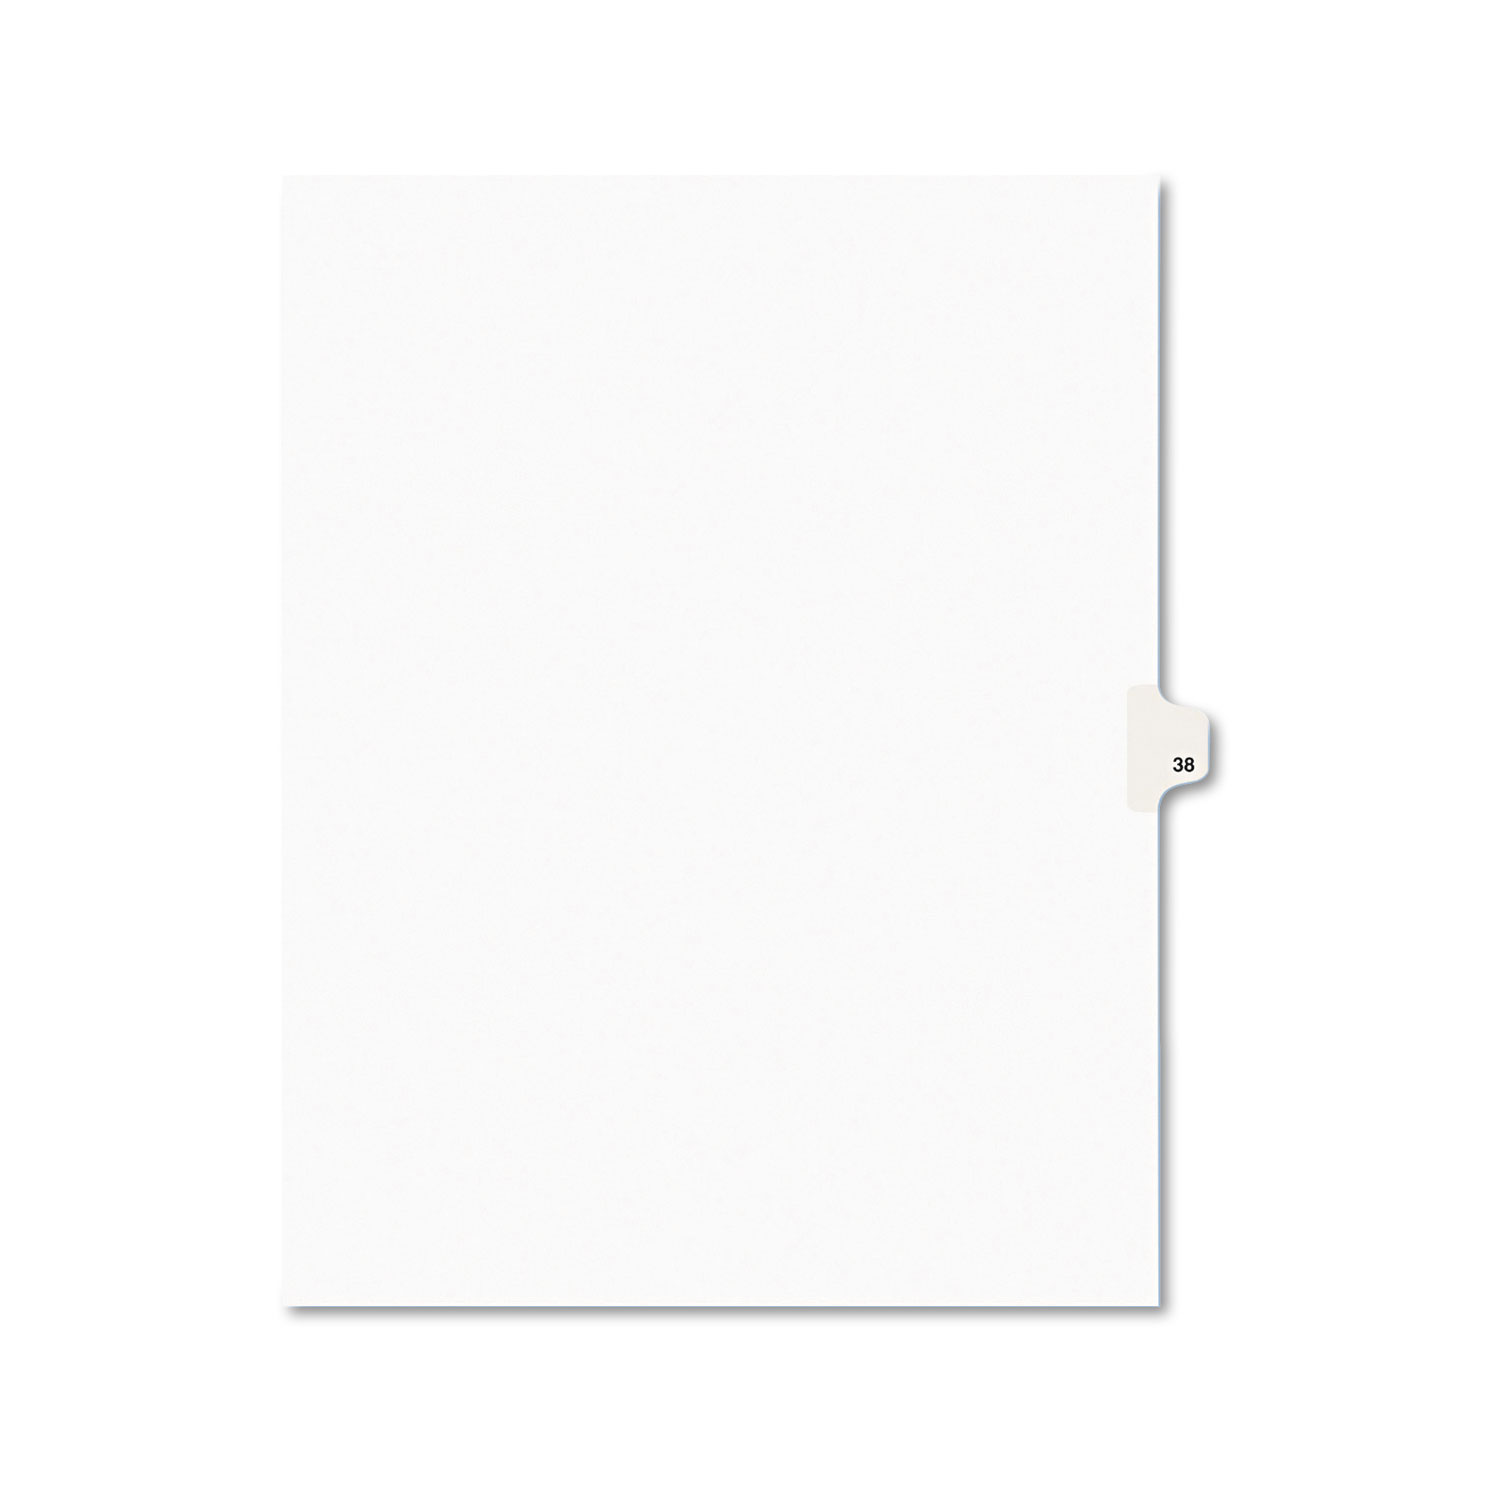  Avery 01038 Preprinted Legal Exhibit Side Tab Index Dividers, Avery Style, 10-Tab, 38, 11 x 8.5, White, 25/Pack (AVE01038) 